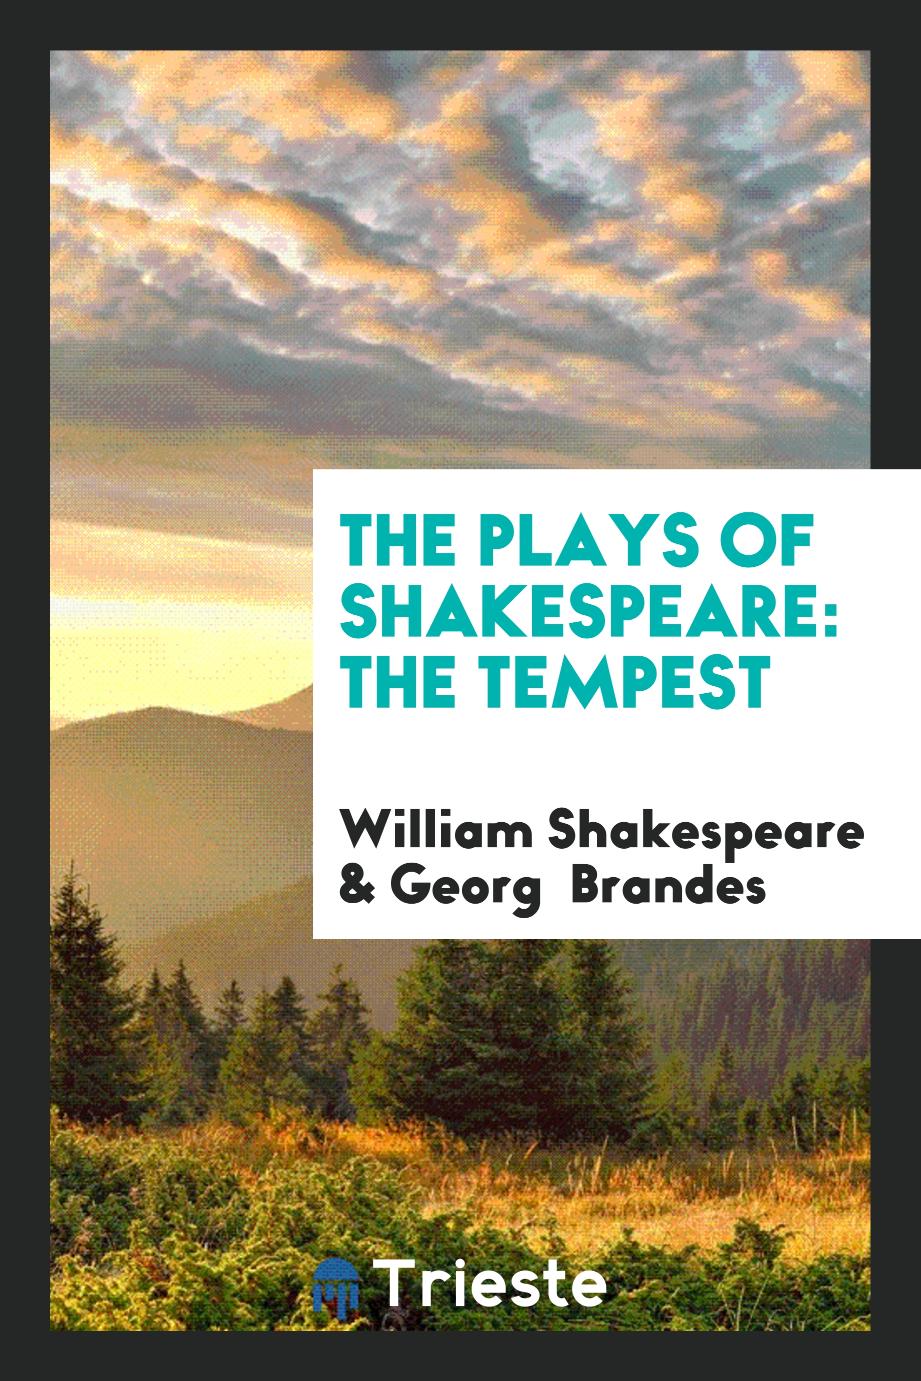 The Plays of Shakespeare: The Tempest